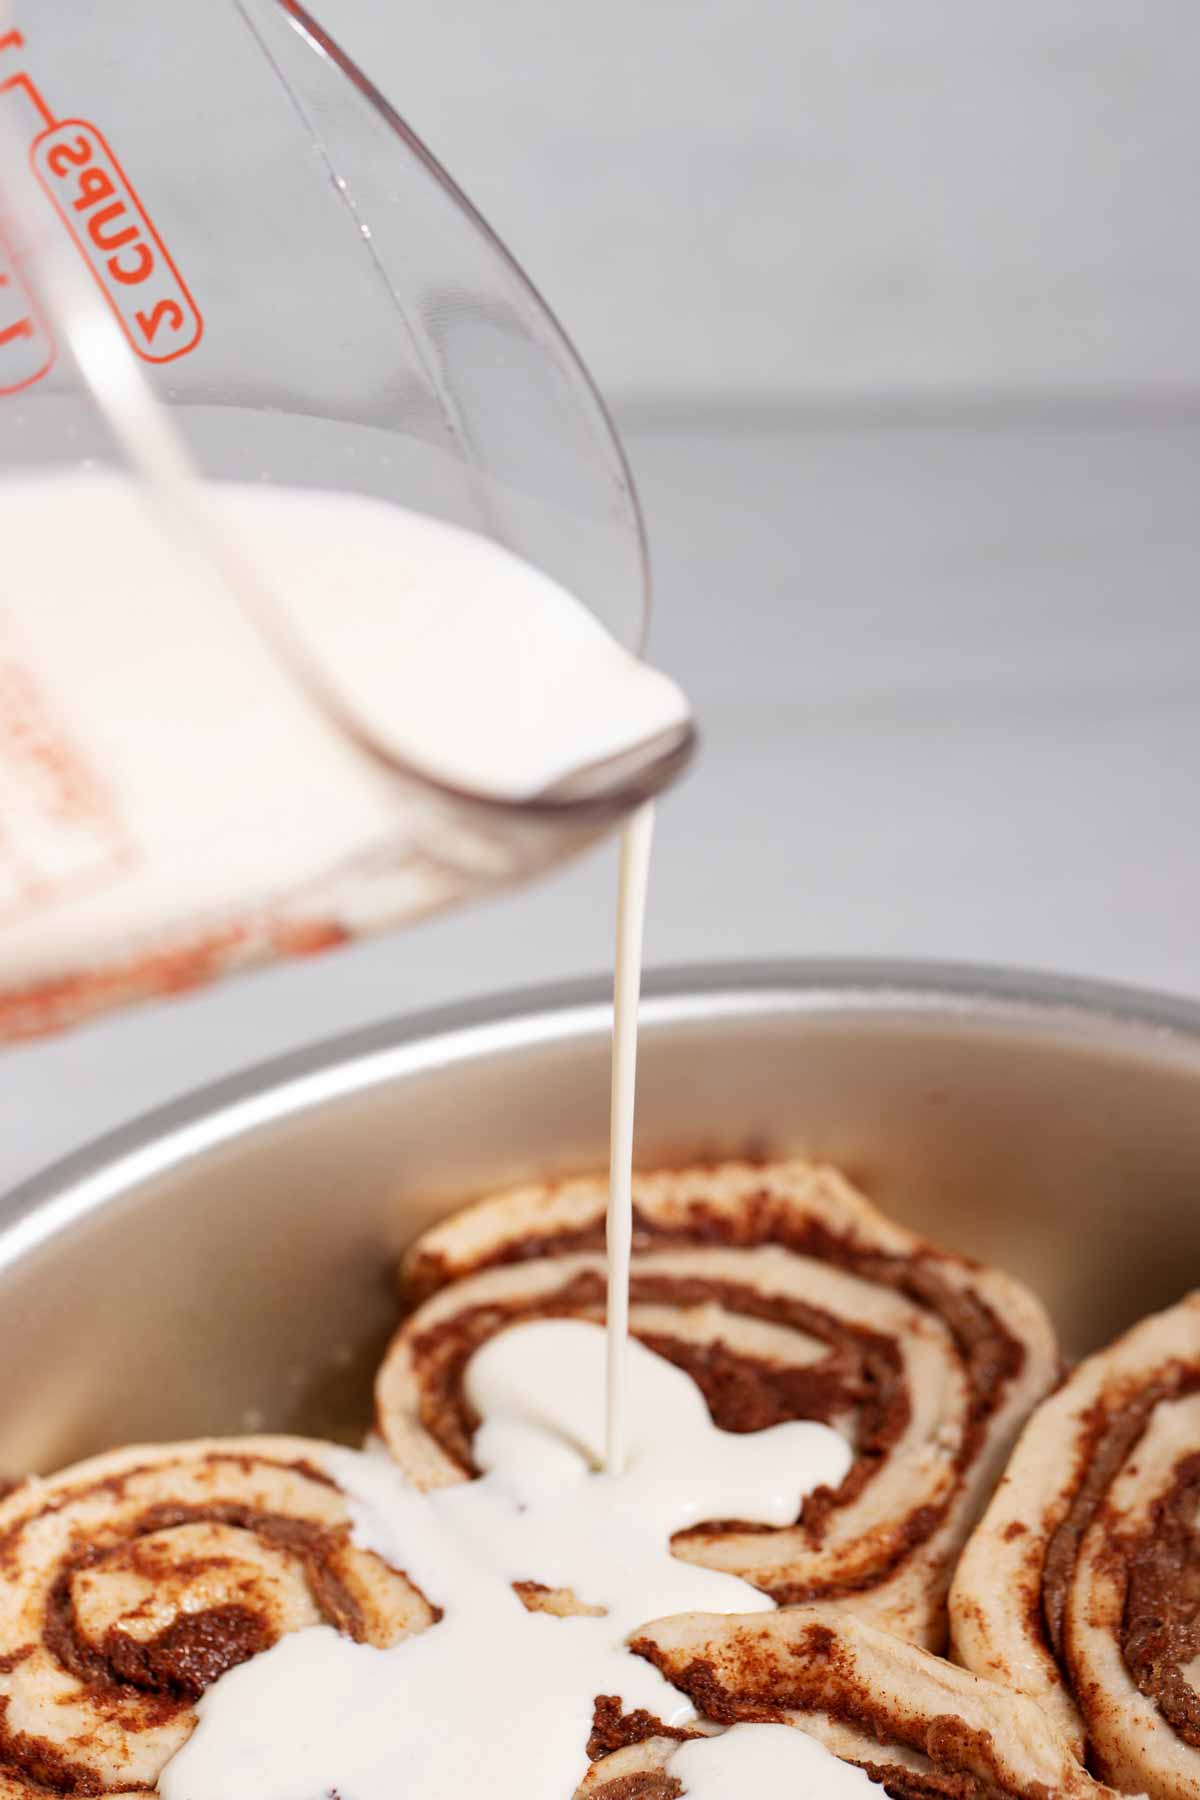 Pouring cream on unbaked canned cinnamon rolls in a pan.